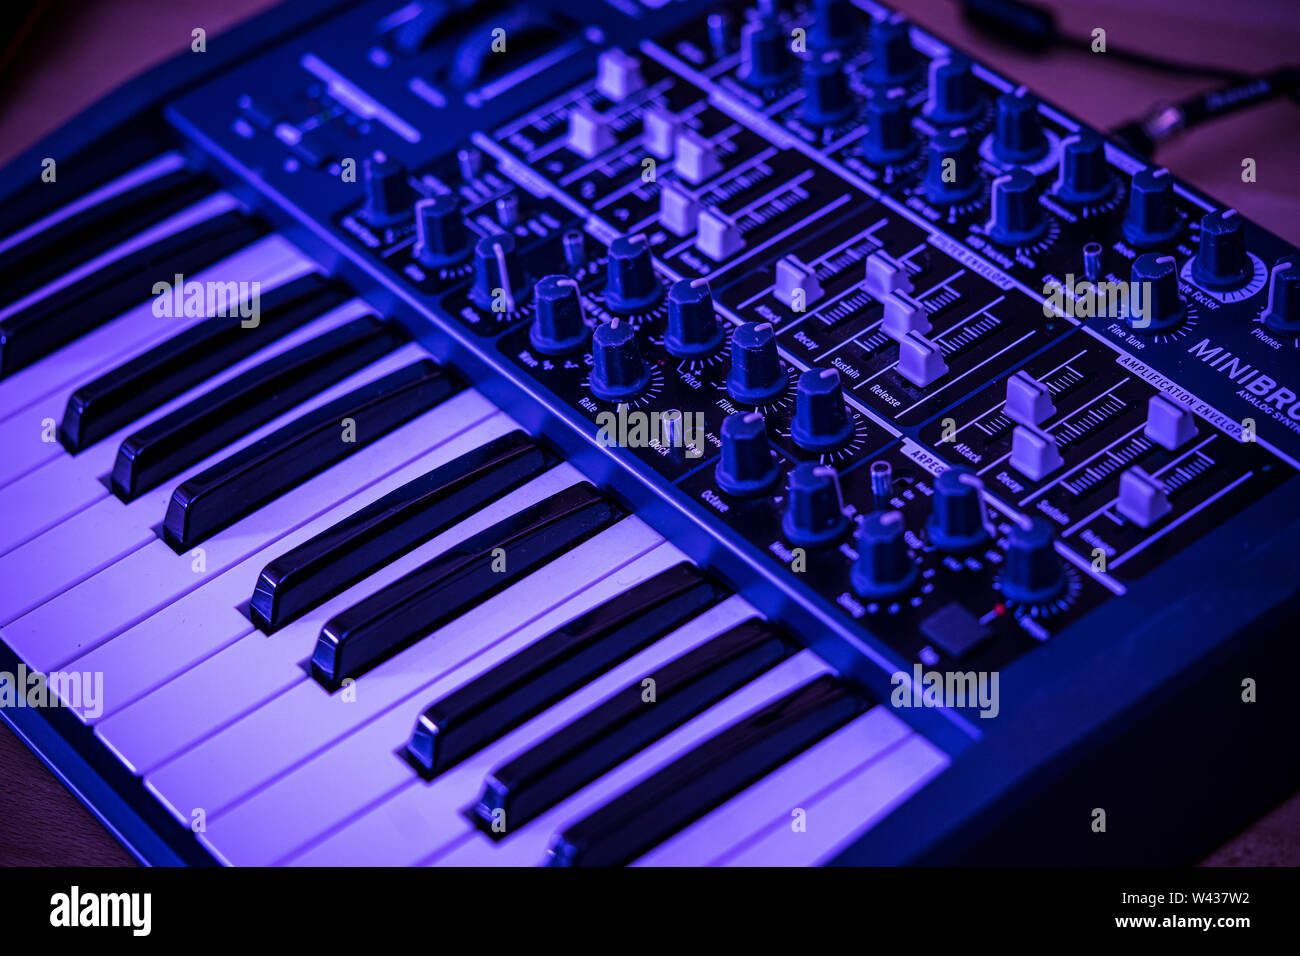 Electronic music production, an Arturia Mini Brute analog synthesizer keyboard with many dials and sliders to chang Stock Photo